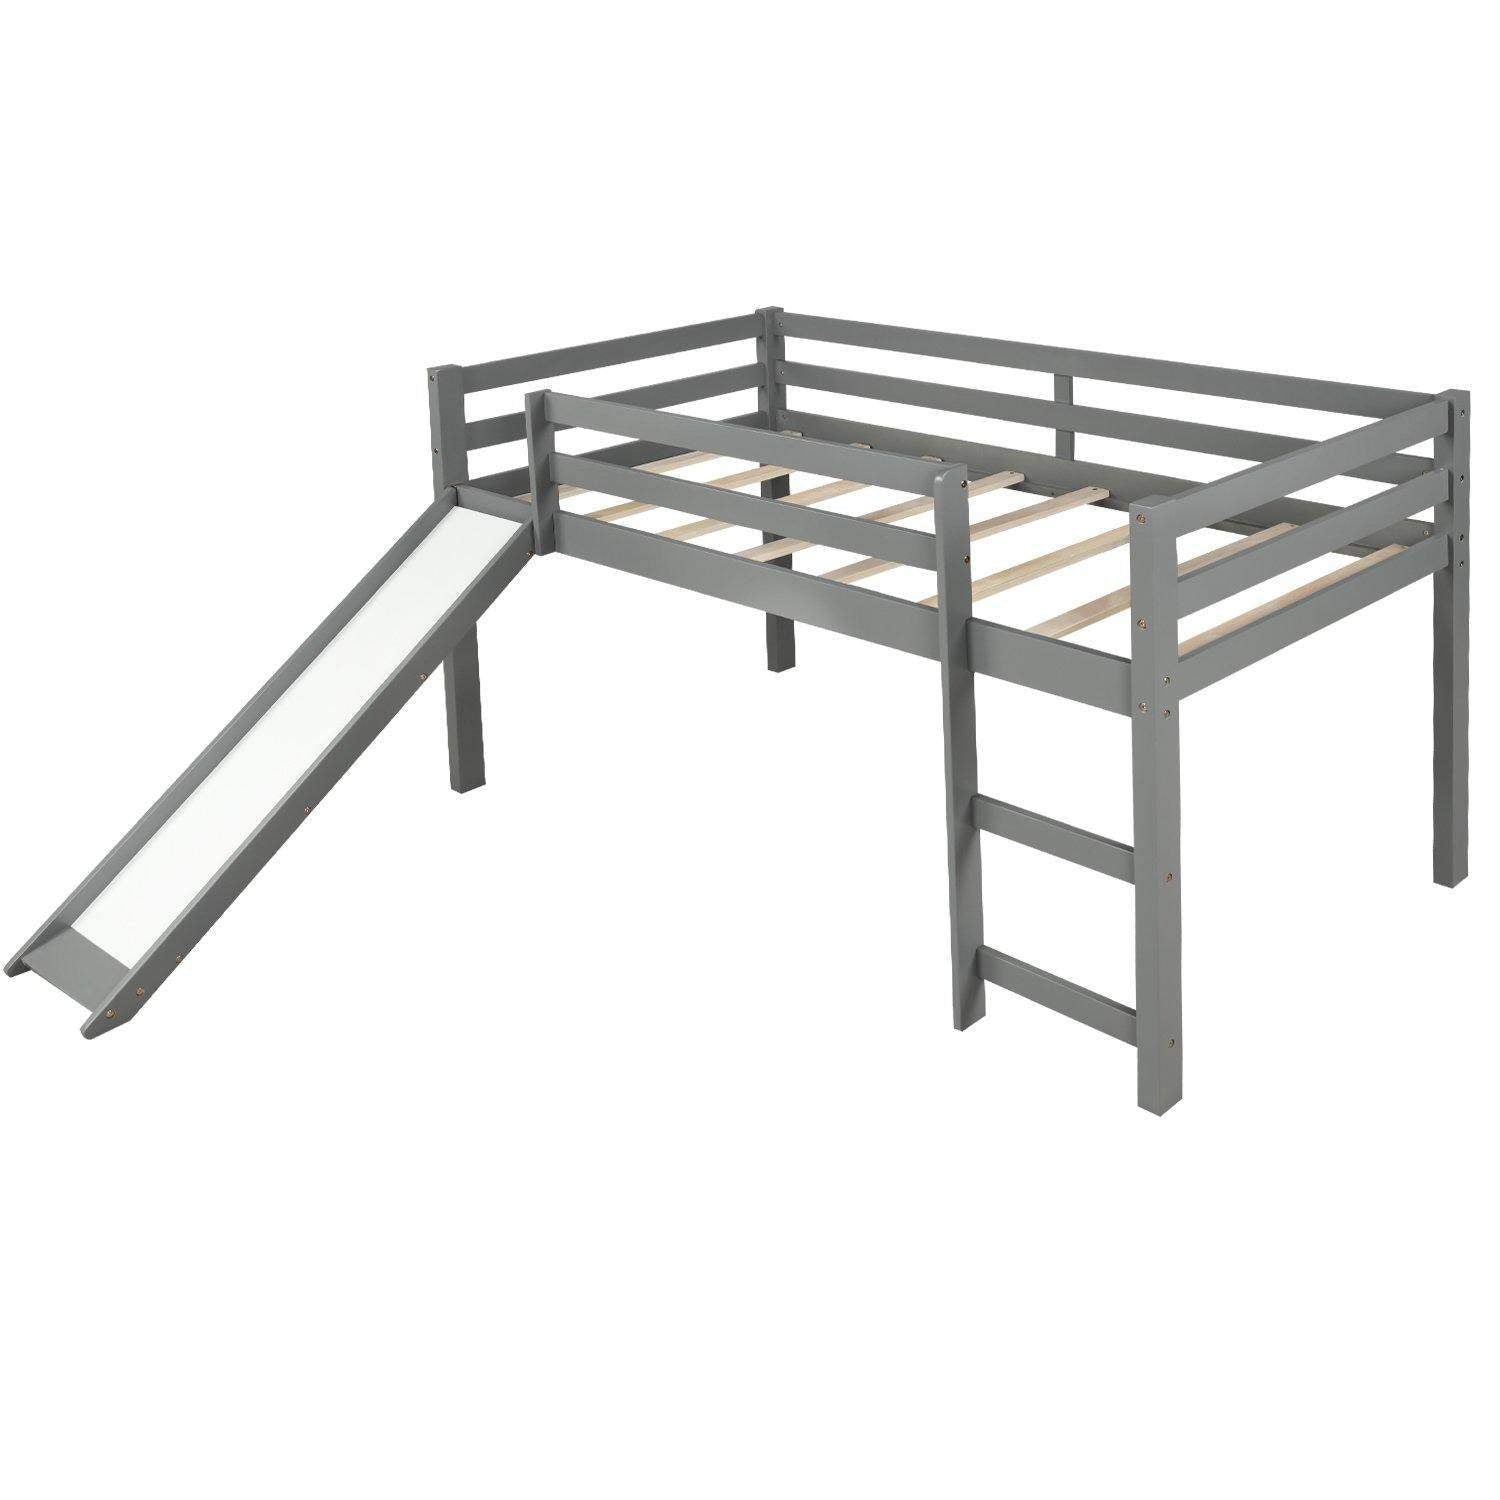 Loft Twin Bed With Slide Multifunctional Design-bed,Kid bed